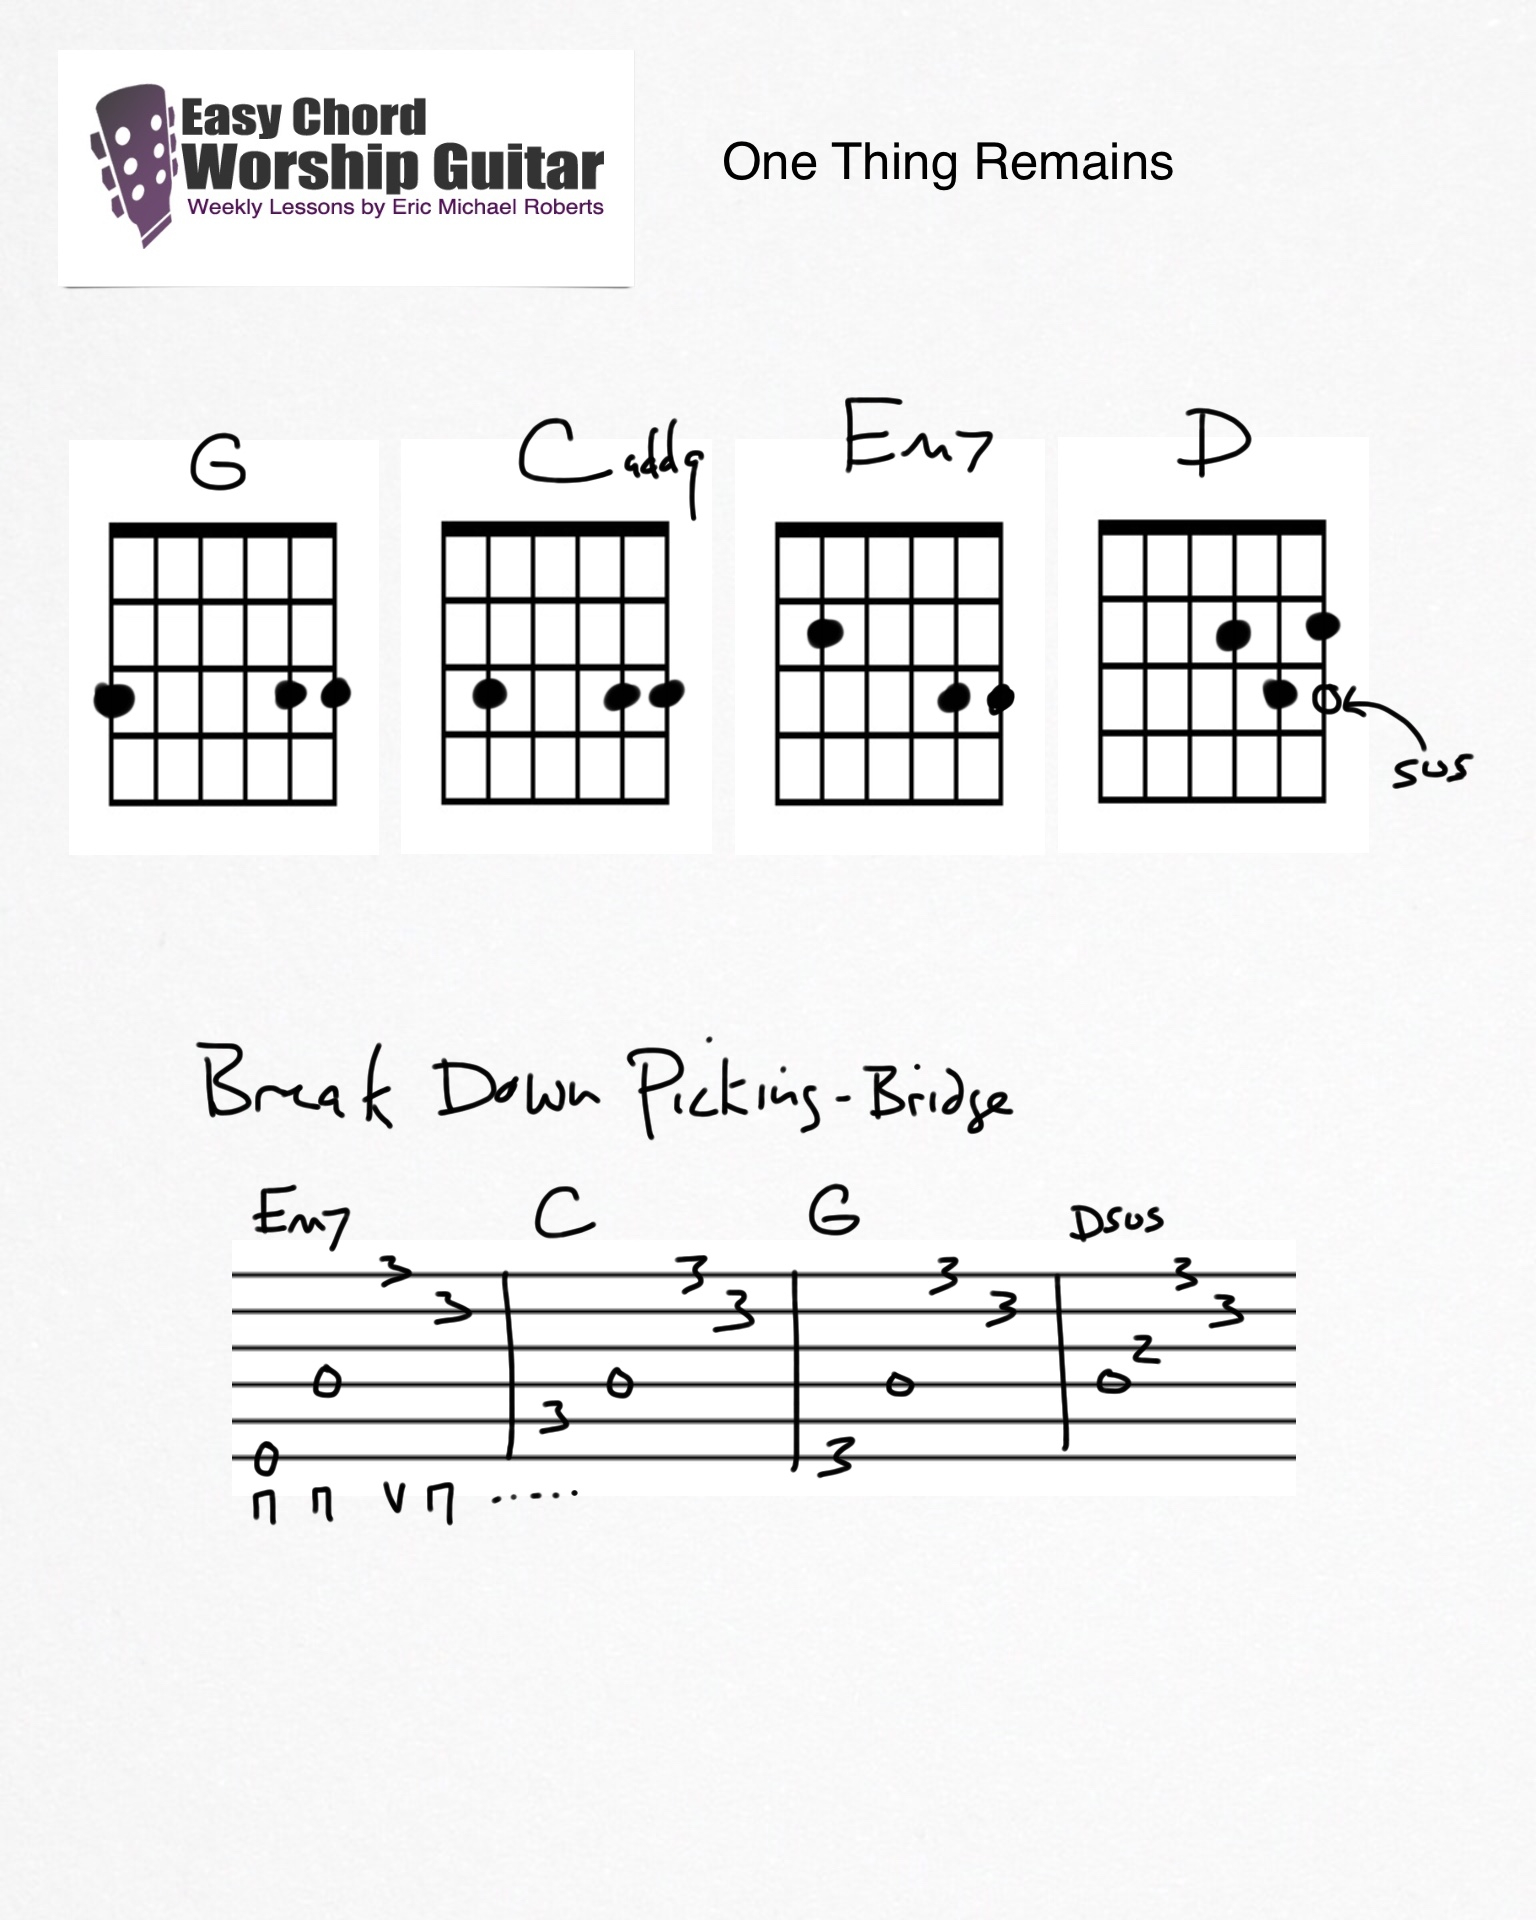 One Thing Remains Chords One Thing Remains Easy Chord Worship Guitar Wtk